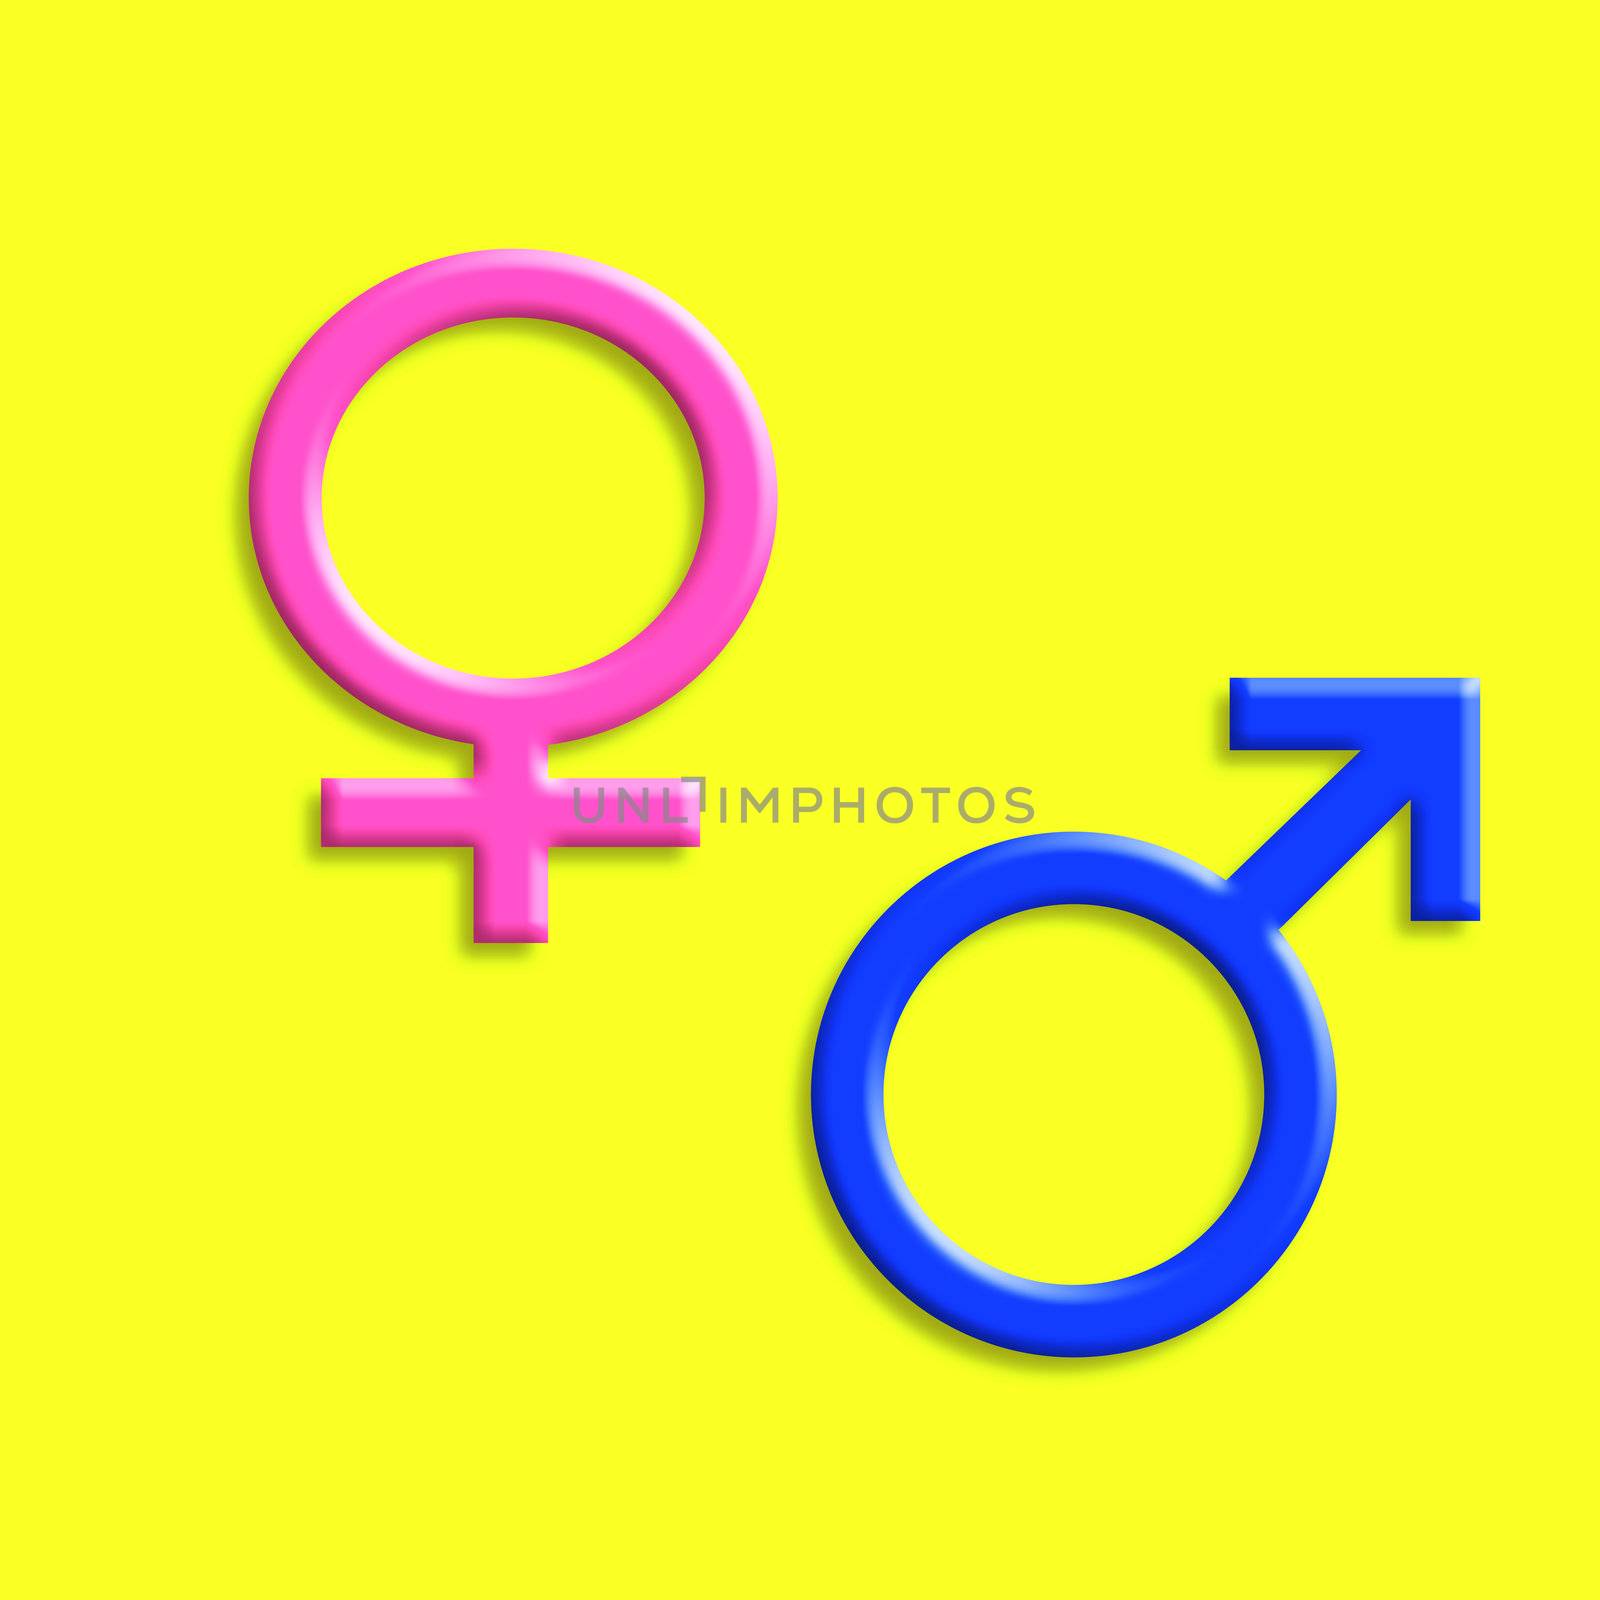 illustration - Gender signs  on a yellow background